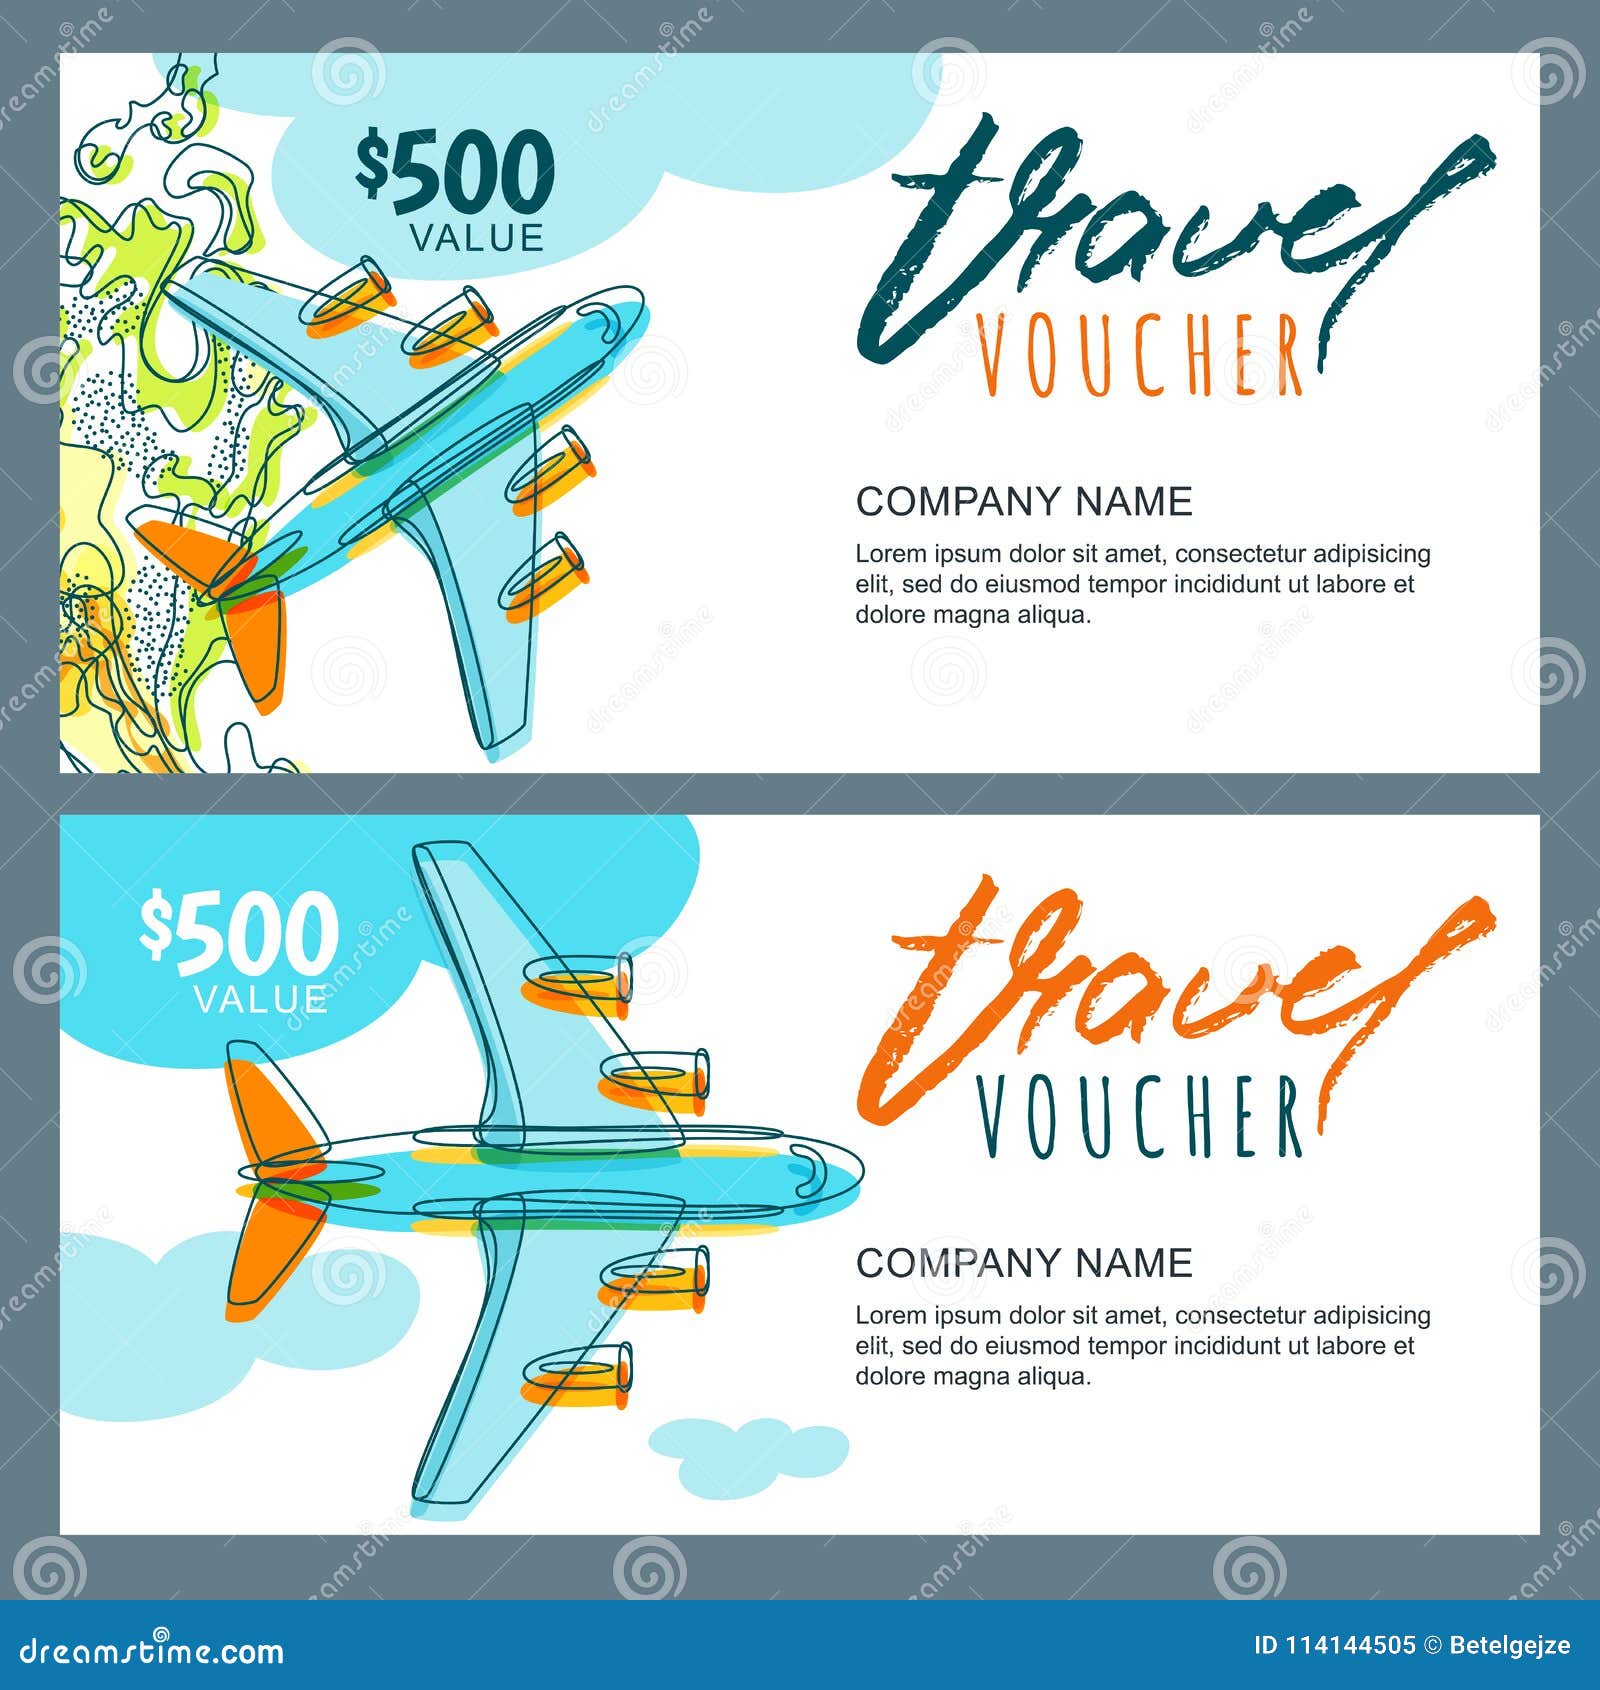 Vector Gift Travel Voucher. Top View Hand Drawn Flying Airplane Throughout Free Travel Gift Certificate Template